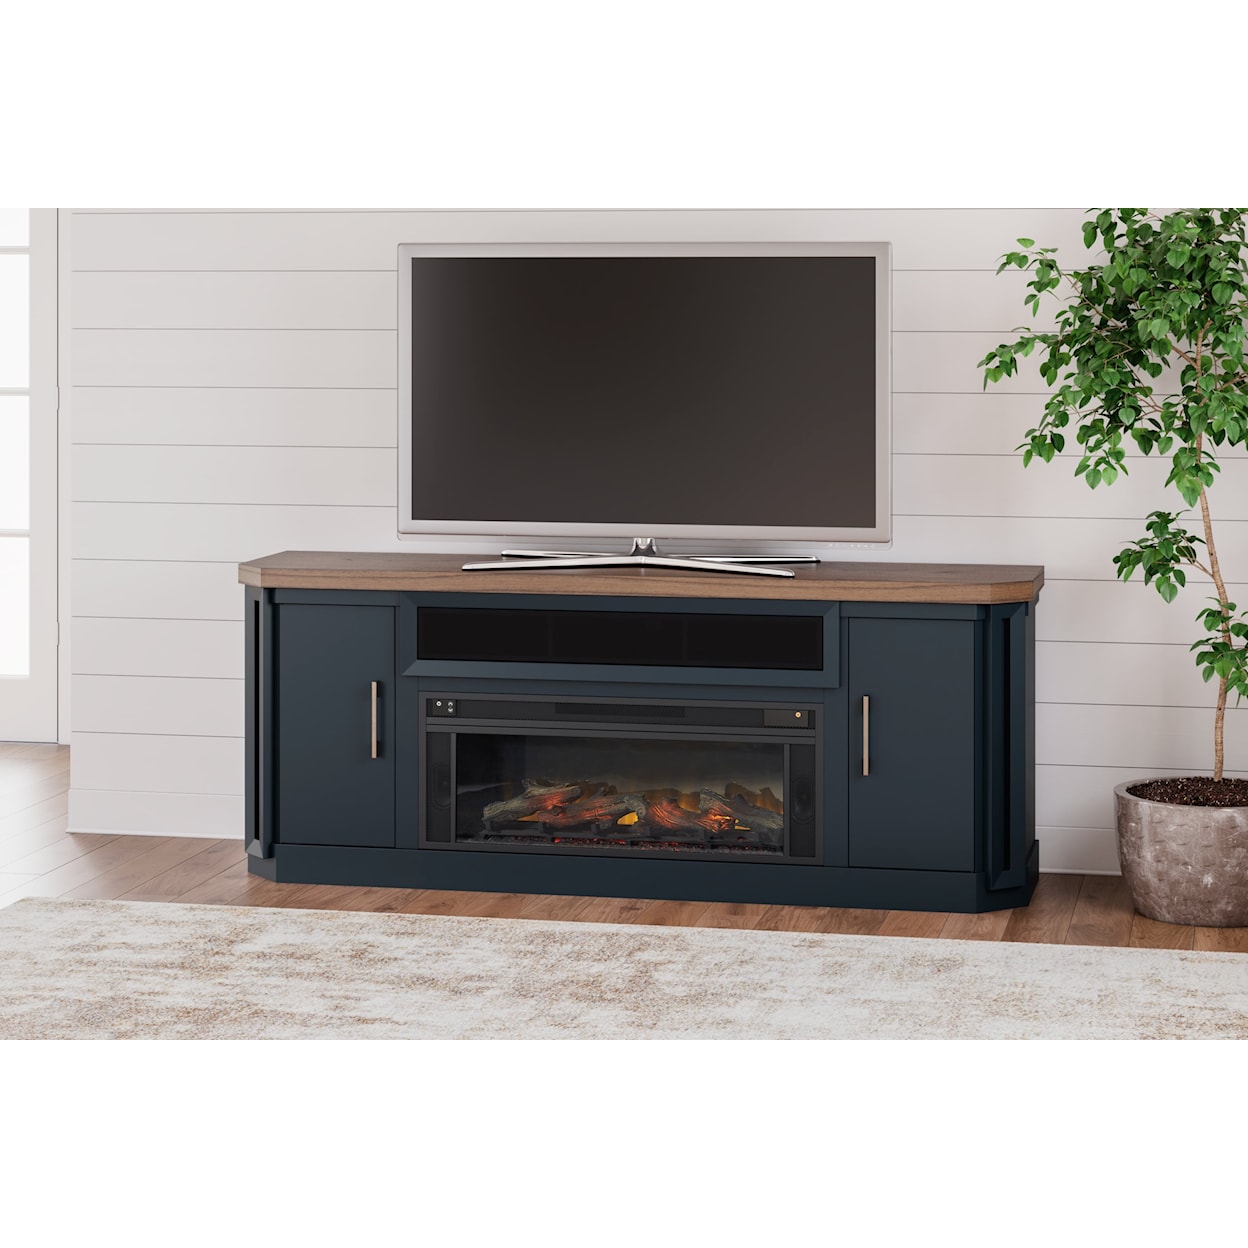 Signature Design Landocken 83" TV Stand with Electric Fireplace